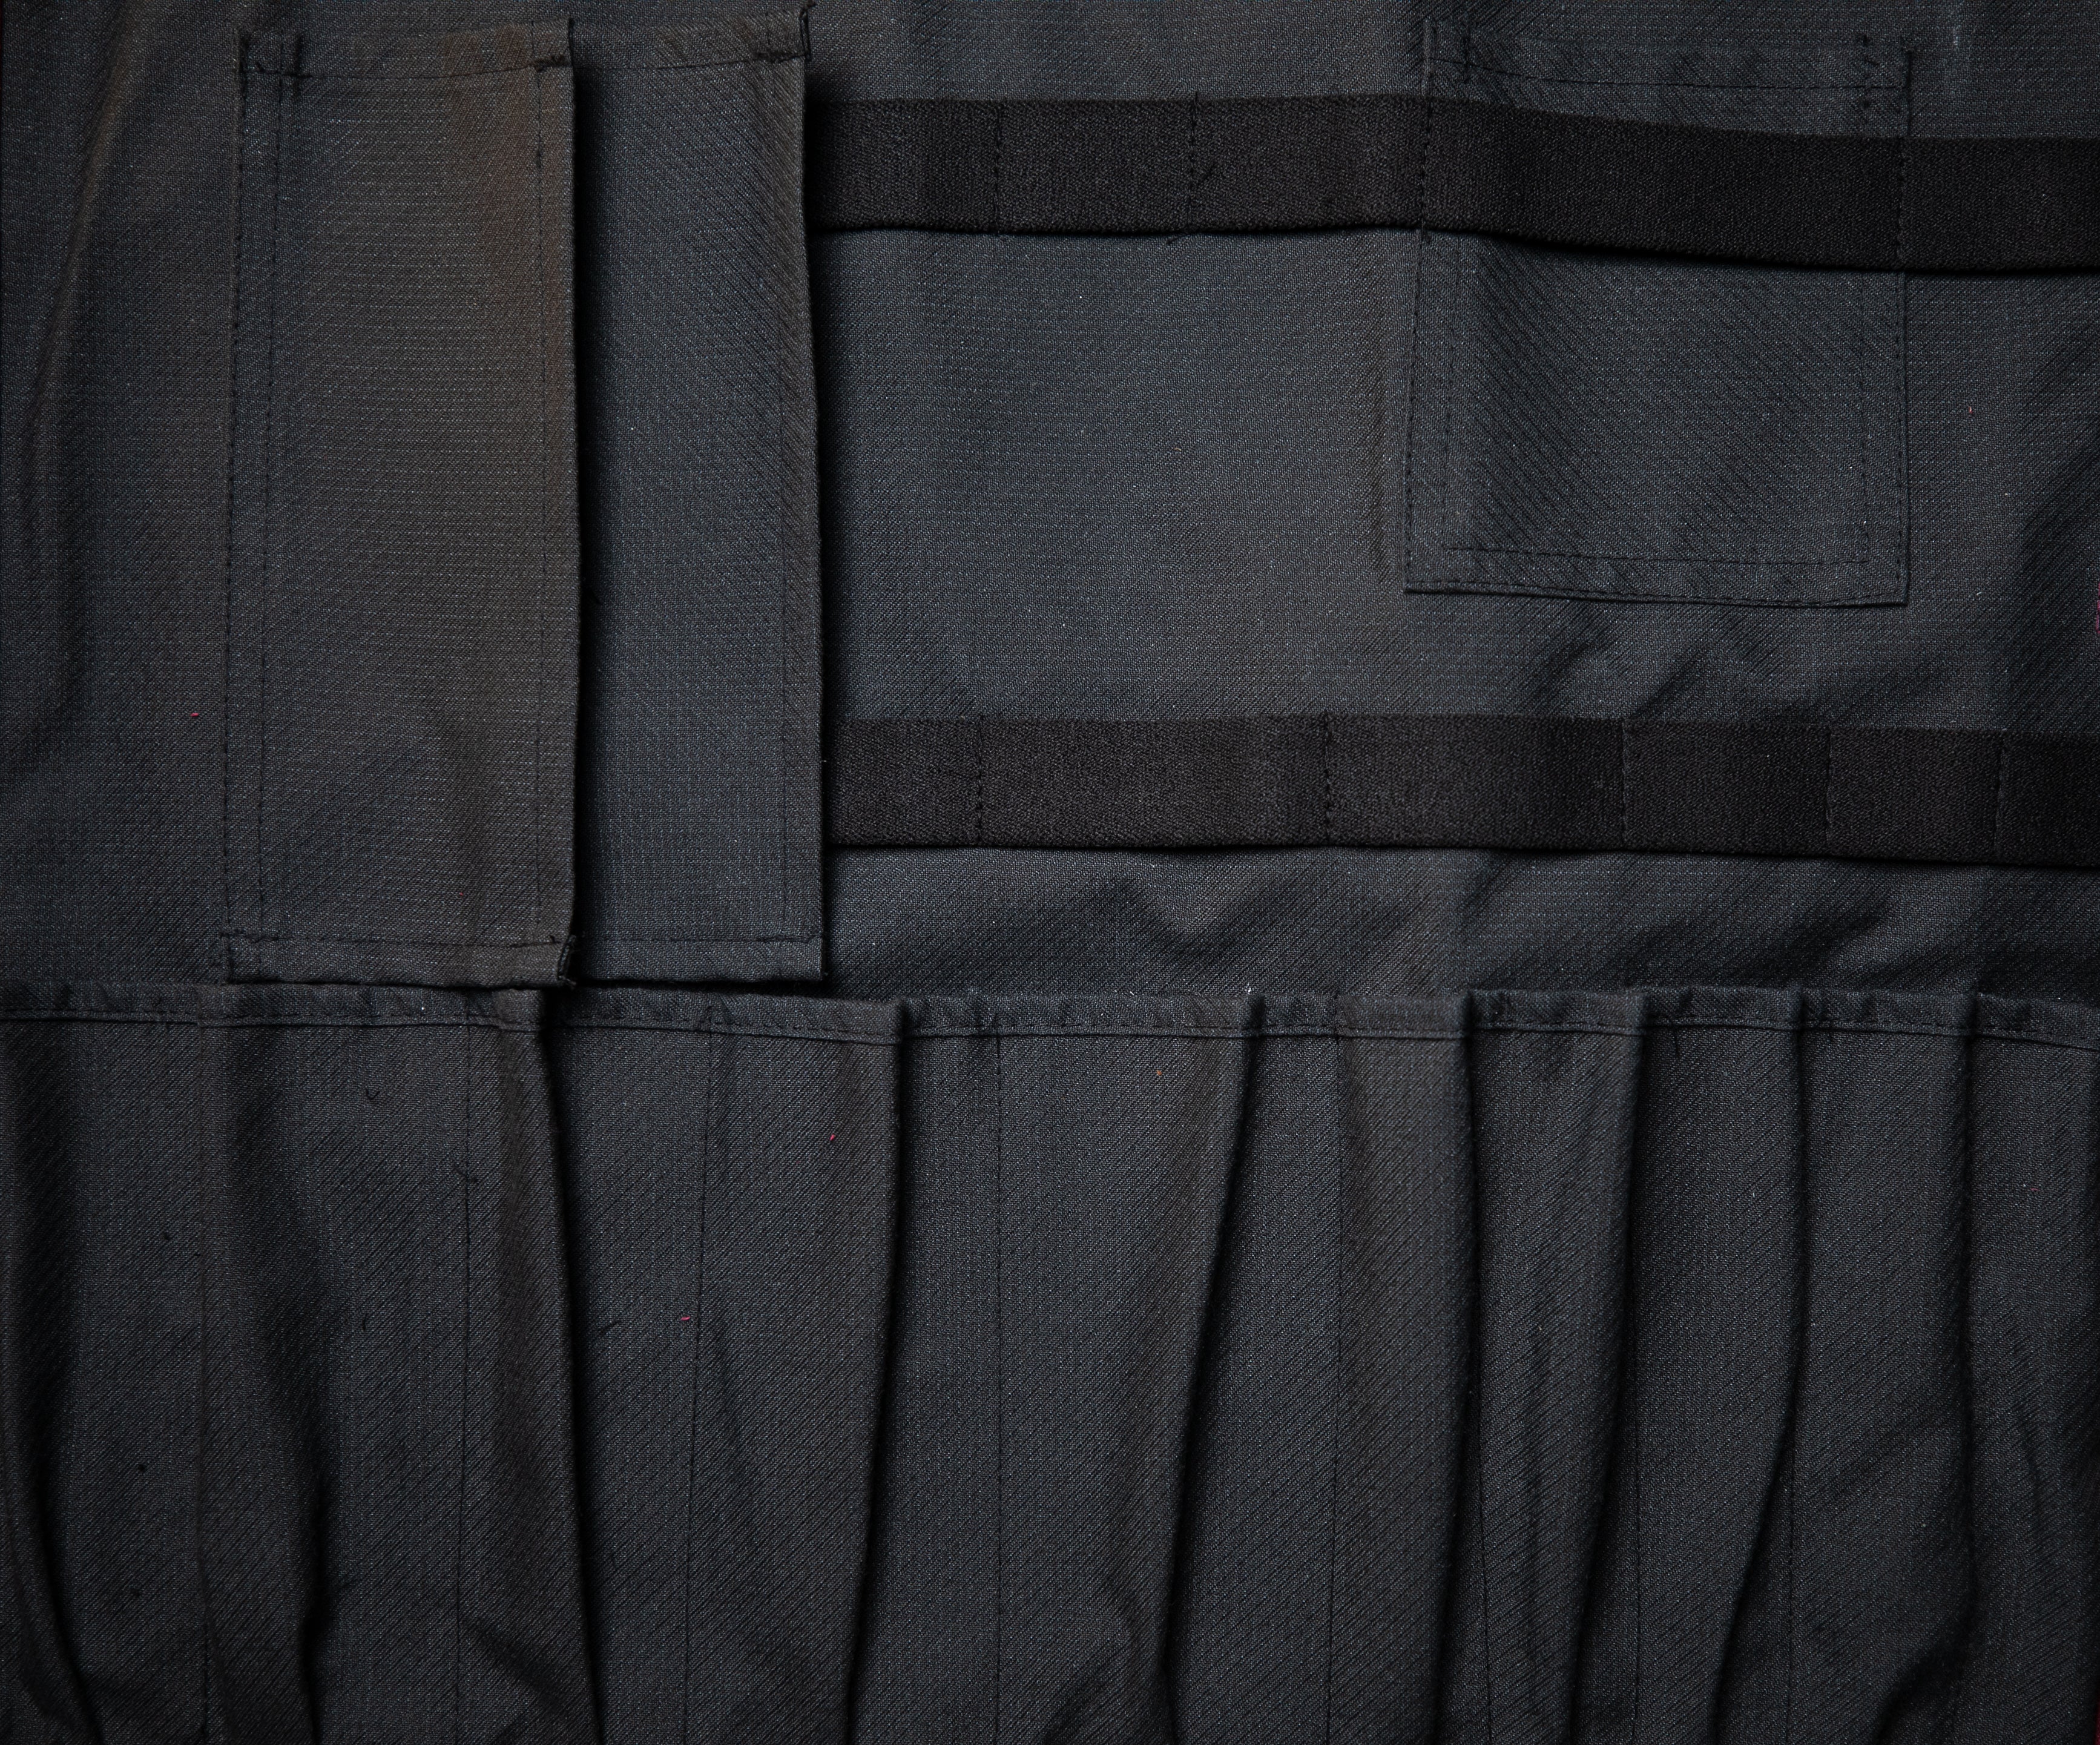 Black interior of the Side Hustle olive knife roll laid out flat on a wooden surface. The interior is made of a 50-50 Kevlar/Nomex blend for long lasting protection. Design by Craftmade Aprons in Minnesota.